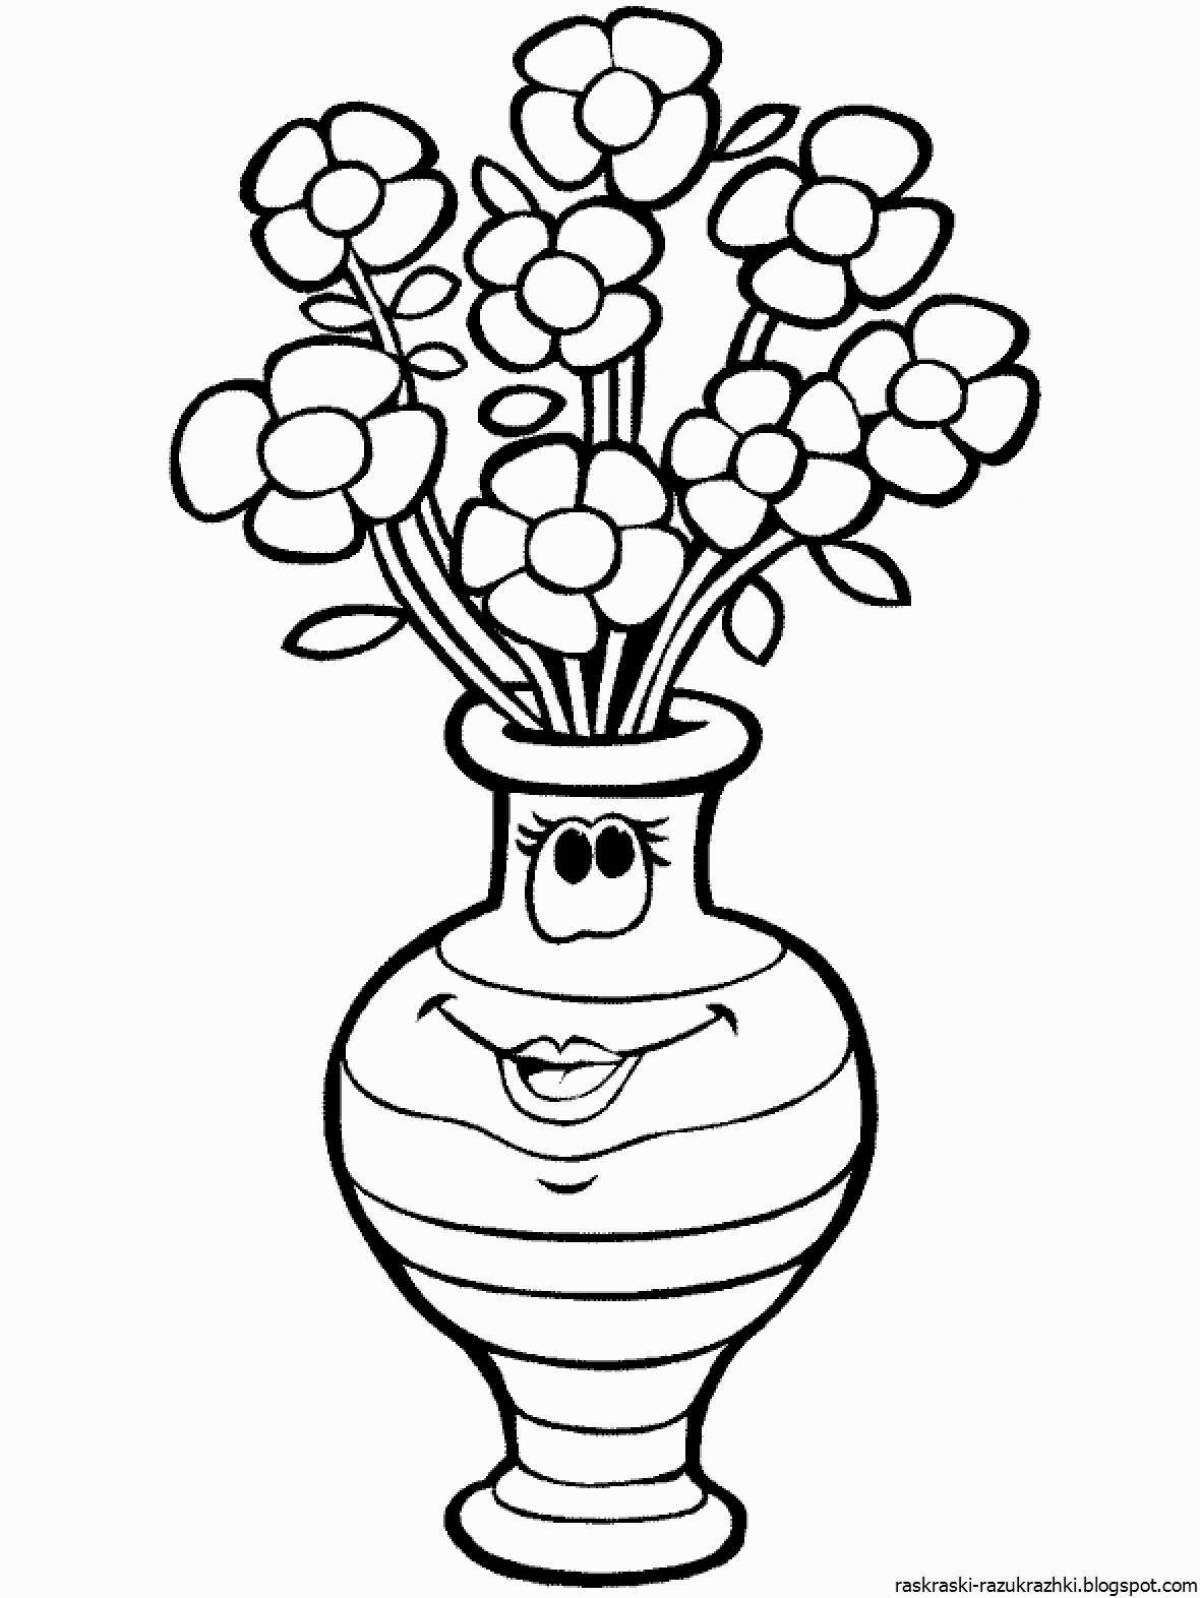 Blissful coloring flowers in a vase